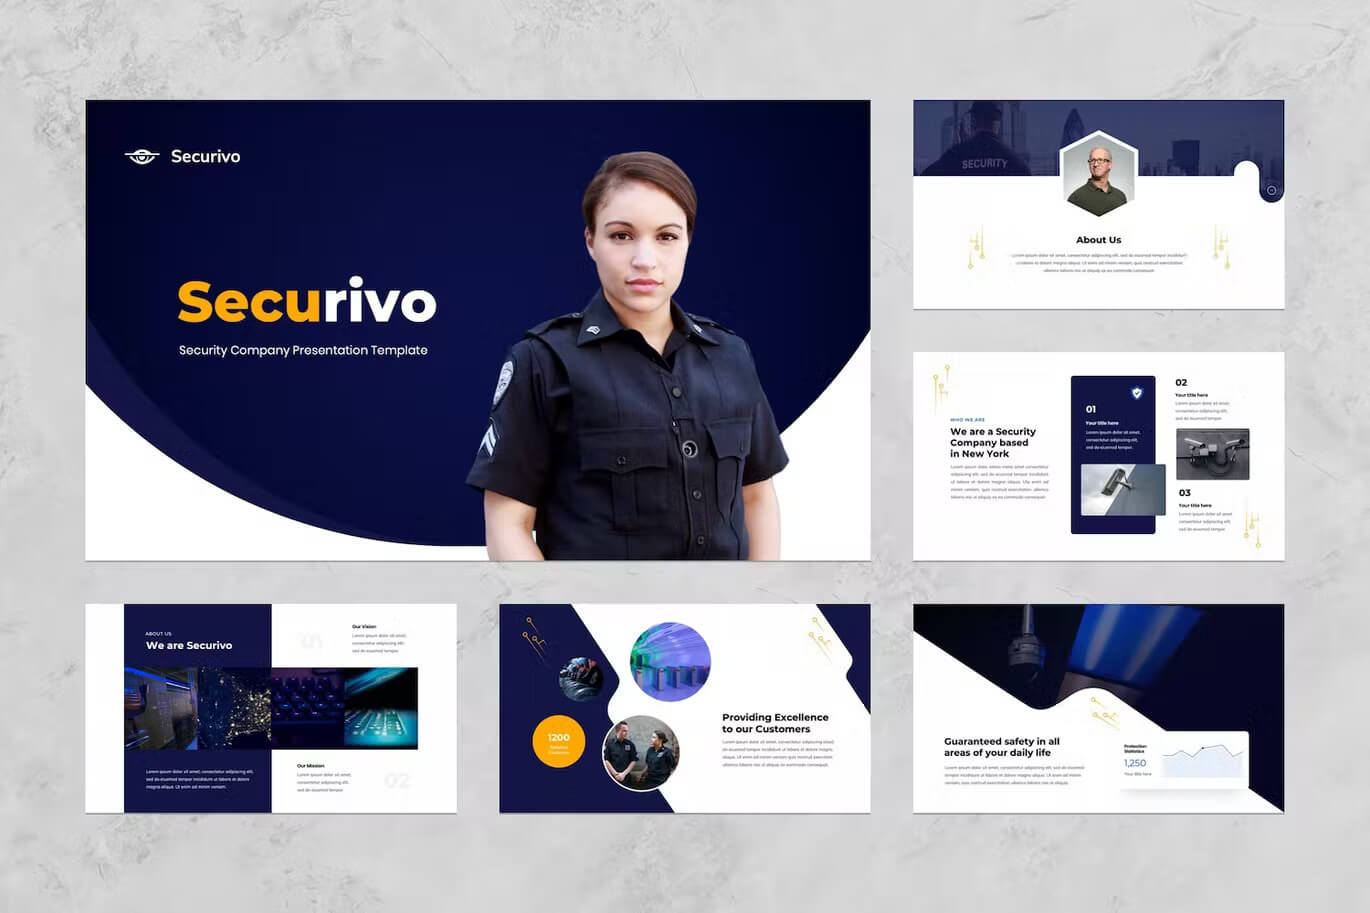 Six Powerpoint templates "Securivo", "We are Securivo", "About Us".